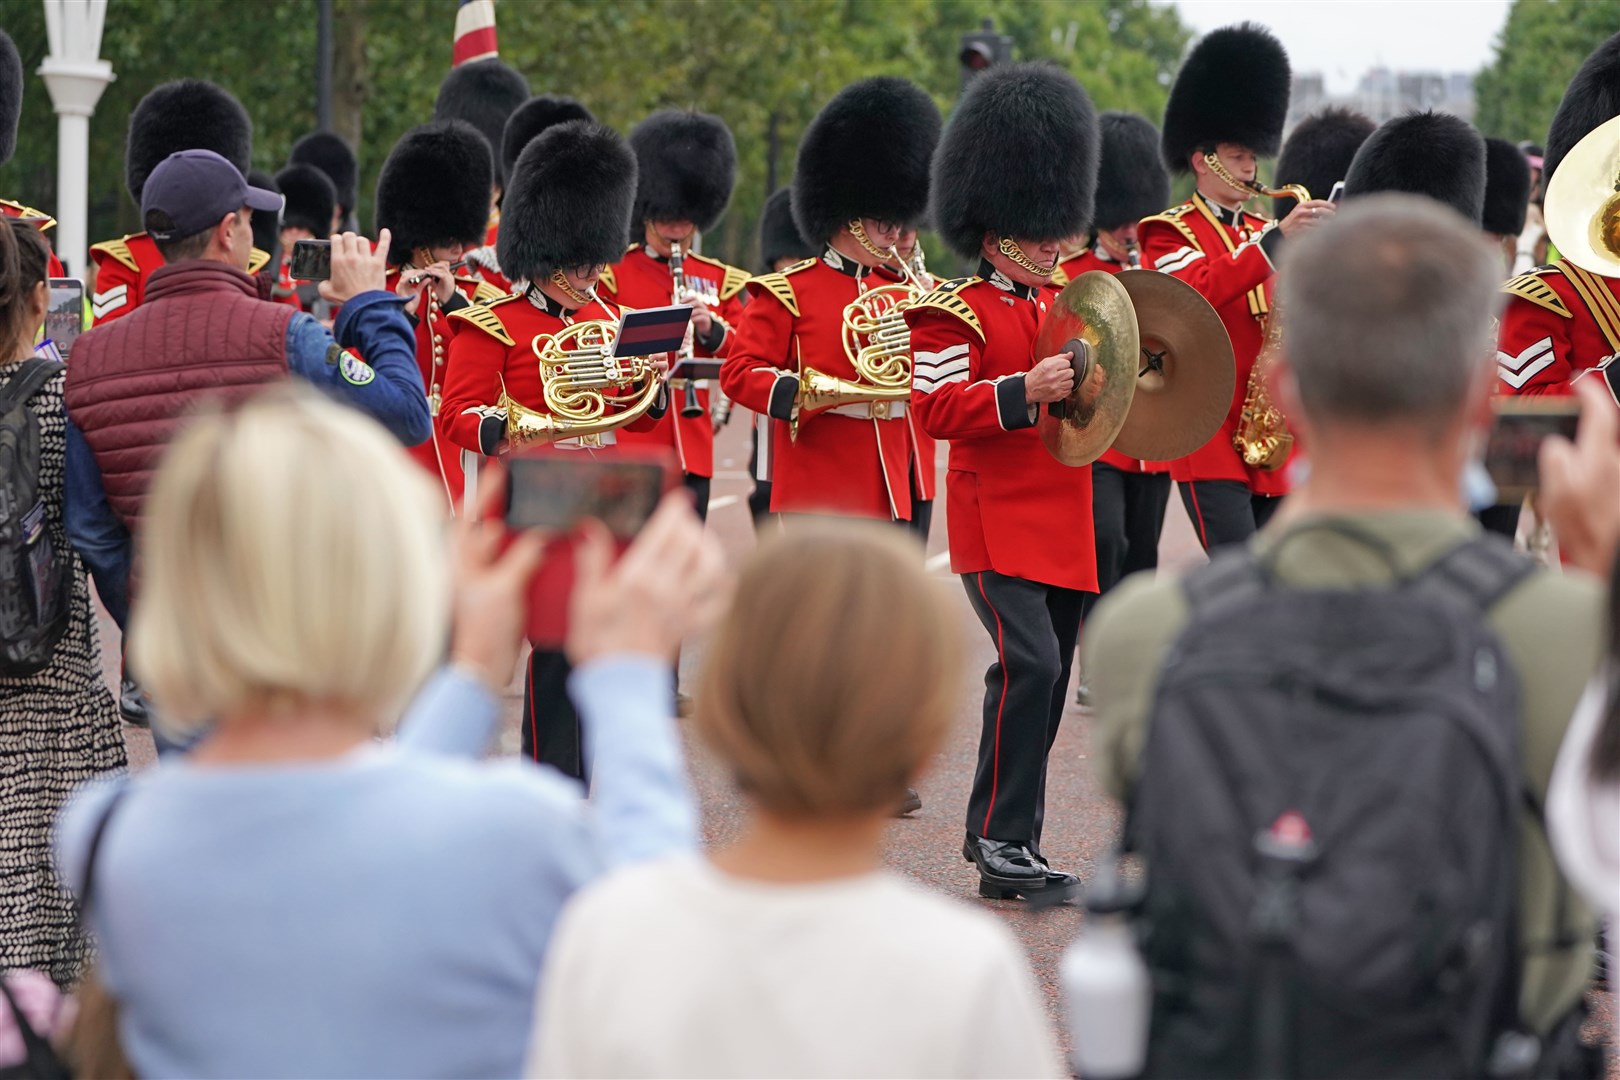 The Band of The Coldstream Guards marching during the Changing the Guard ceremony (Kirsty O’Connor/PA)